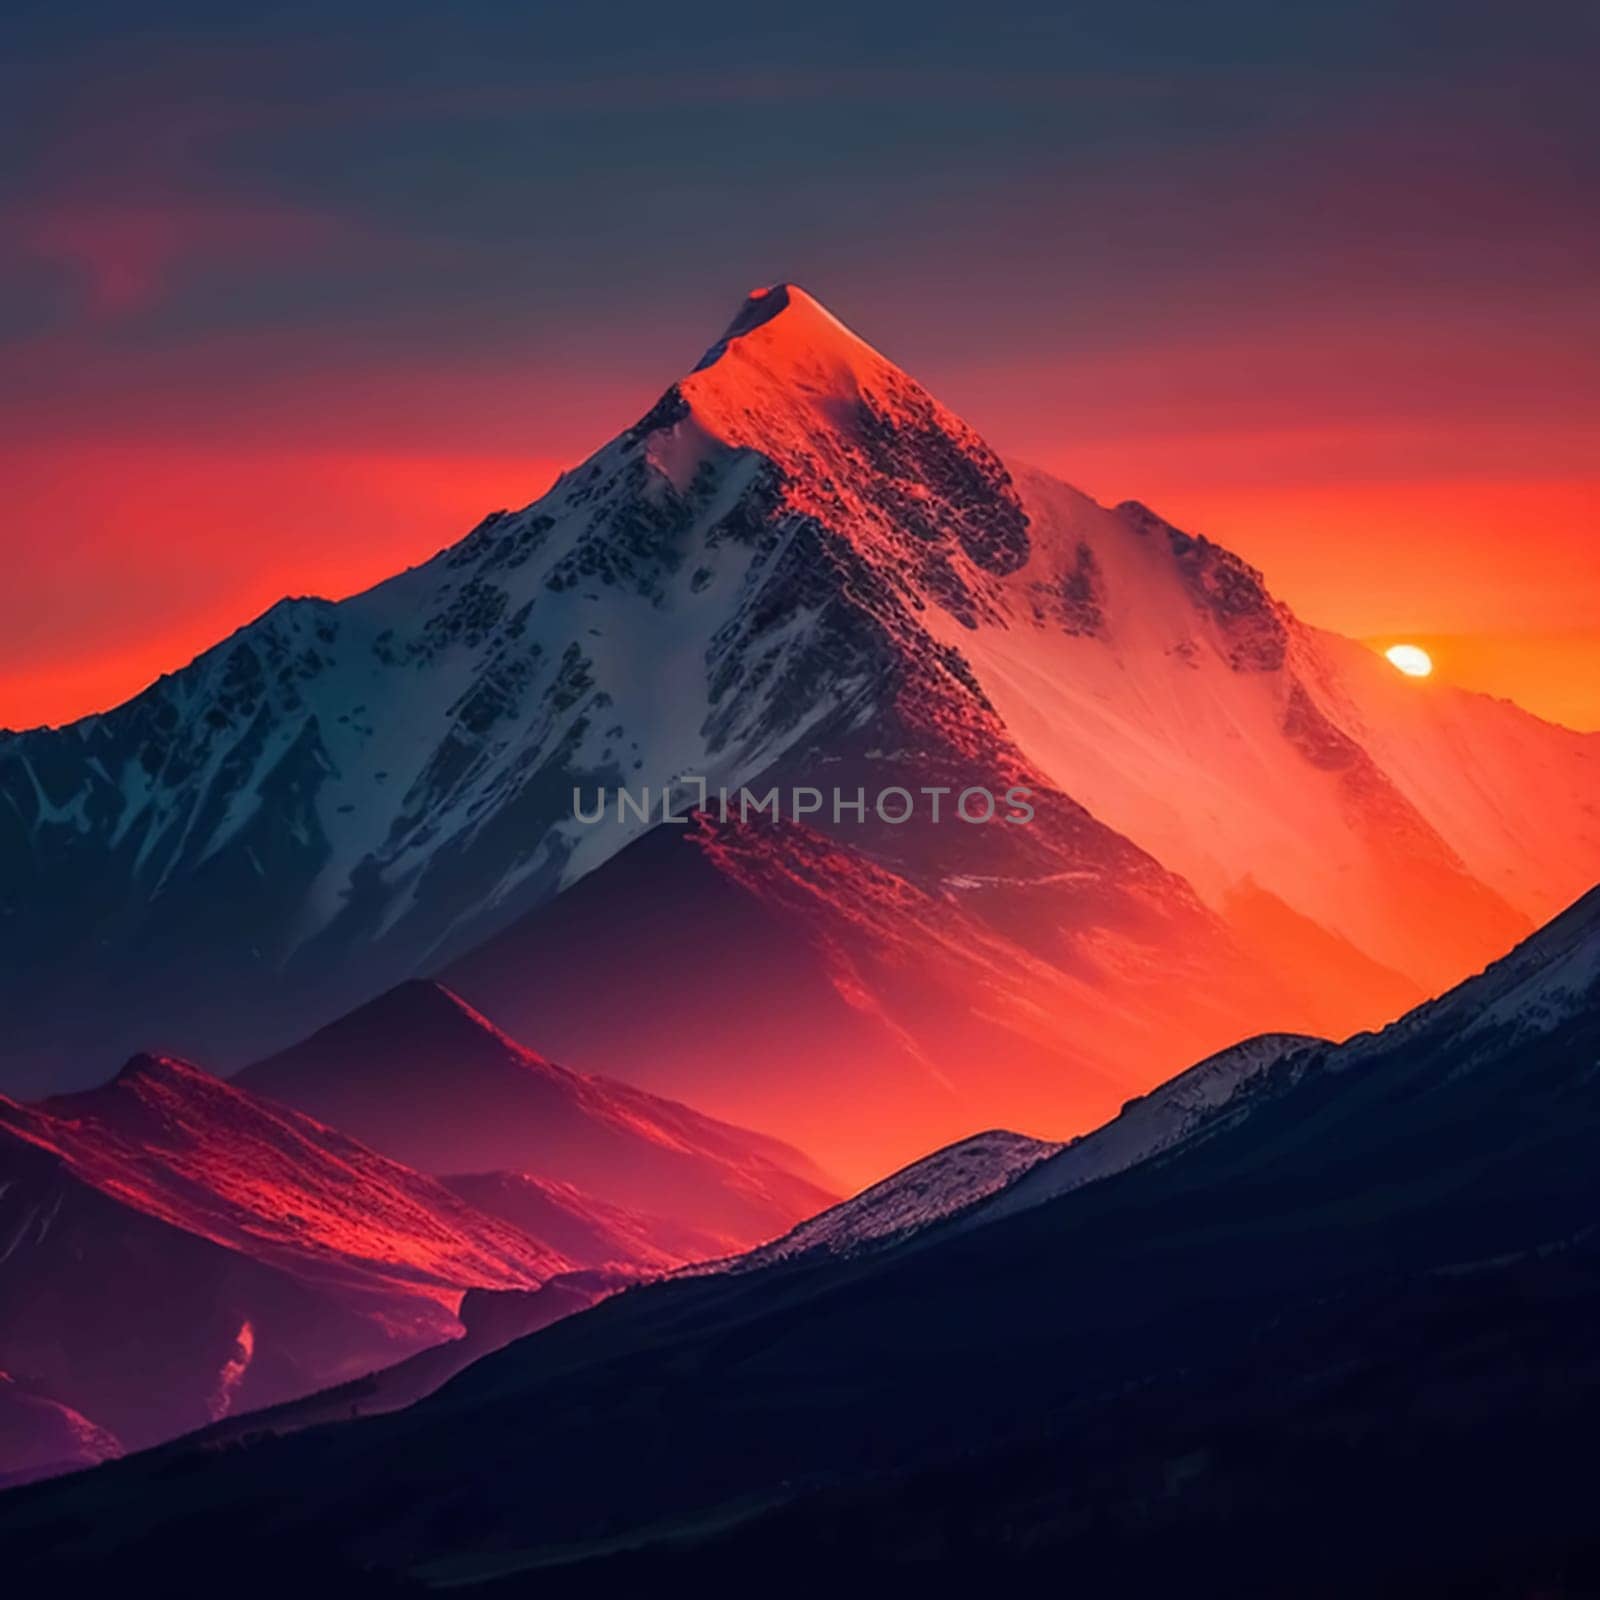 Dawn over the snow capped mountains. Snowy mountain peak at dawn. Sunrise in mountains. Mountain sunrise landscape by antoksena